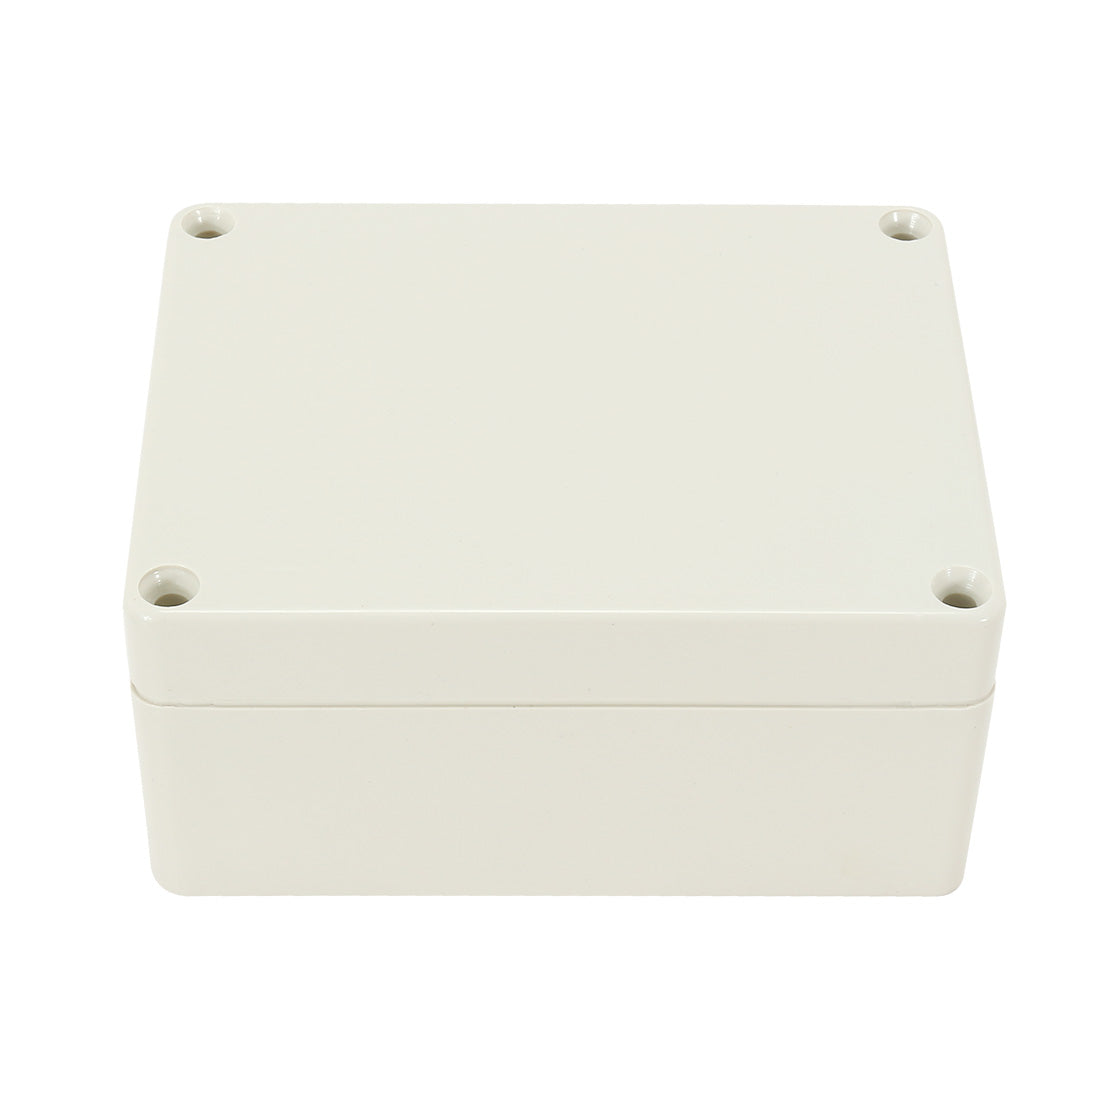 uxcell Uxcell 4.52"x3.54"x2.16"(115mmx90mmx55mm) ABS Junction Box Universal Electric Project Enclosure